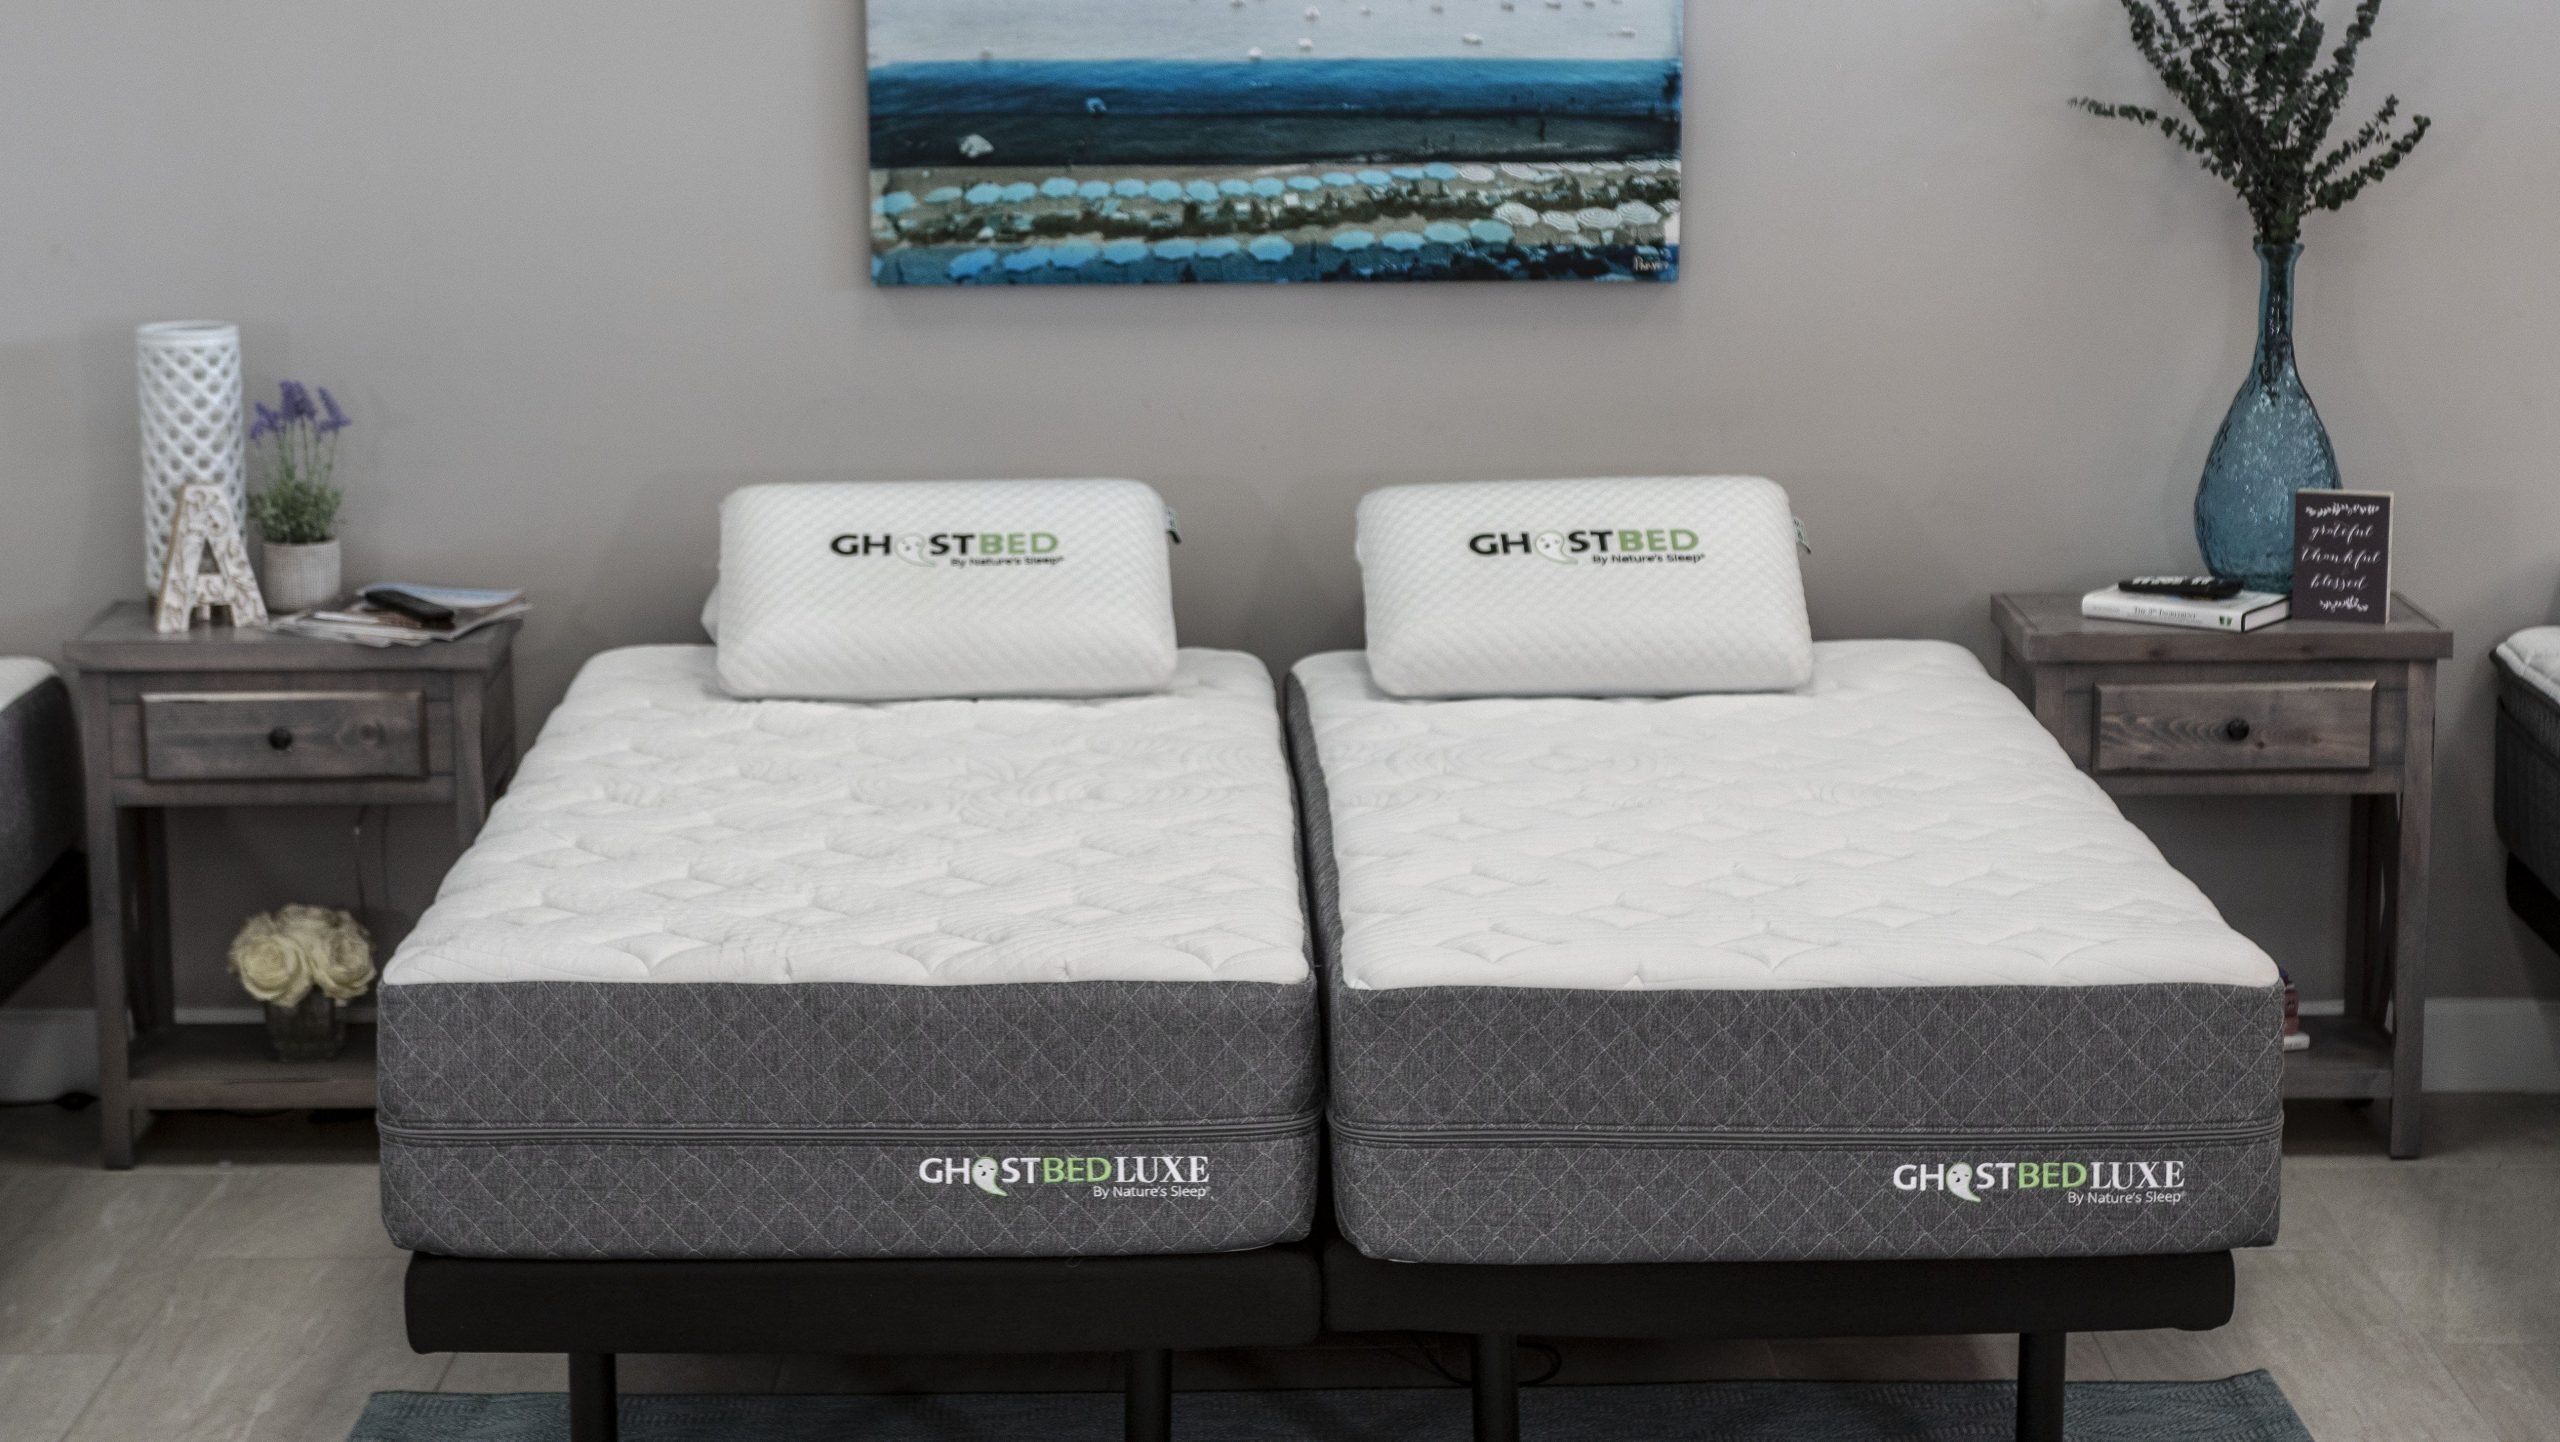 Guide: Why Buy a Split King Mattress Bed in 2020